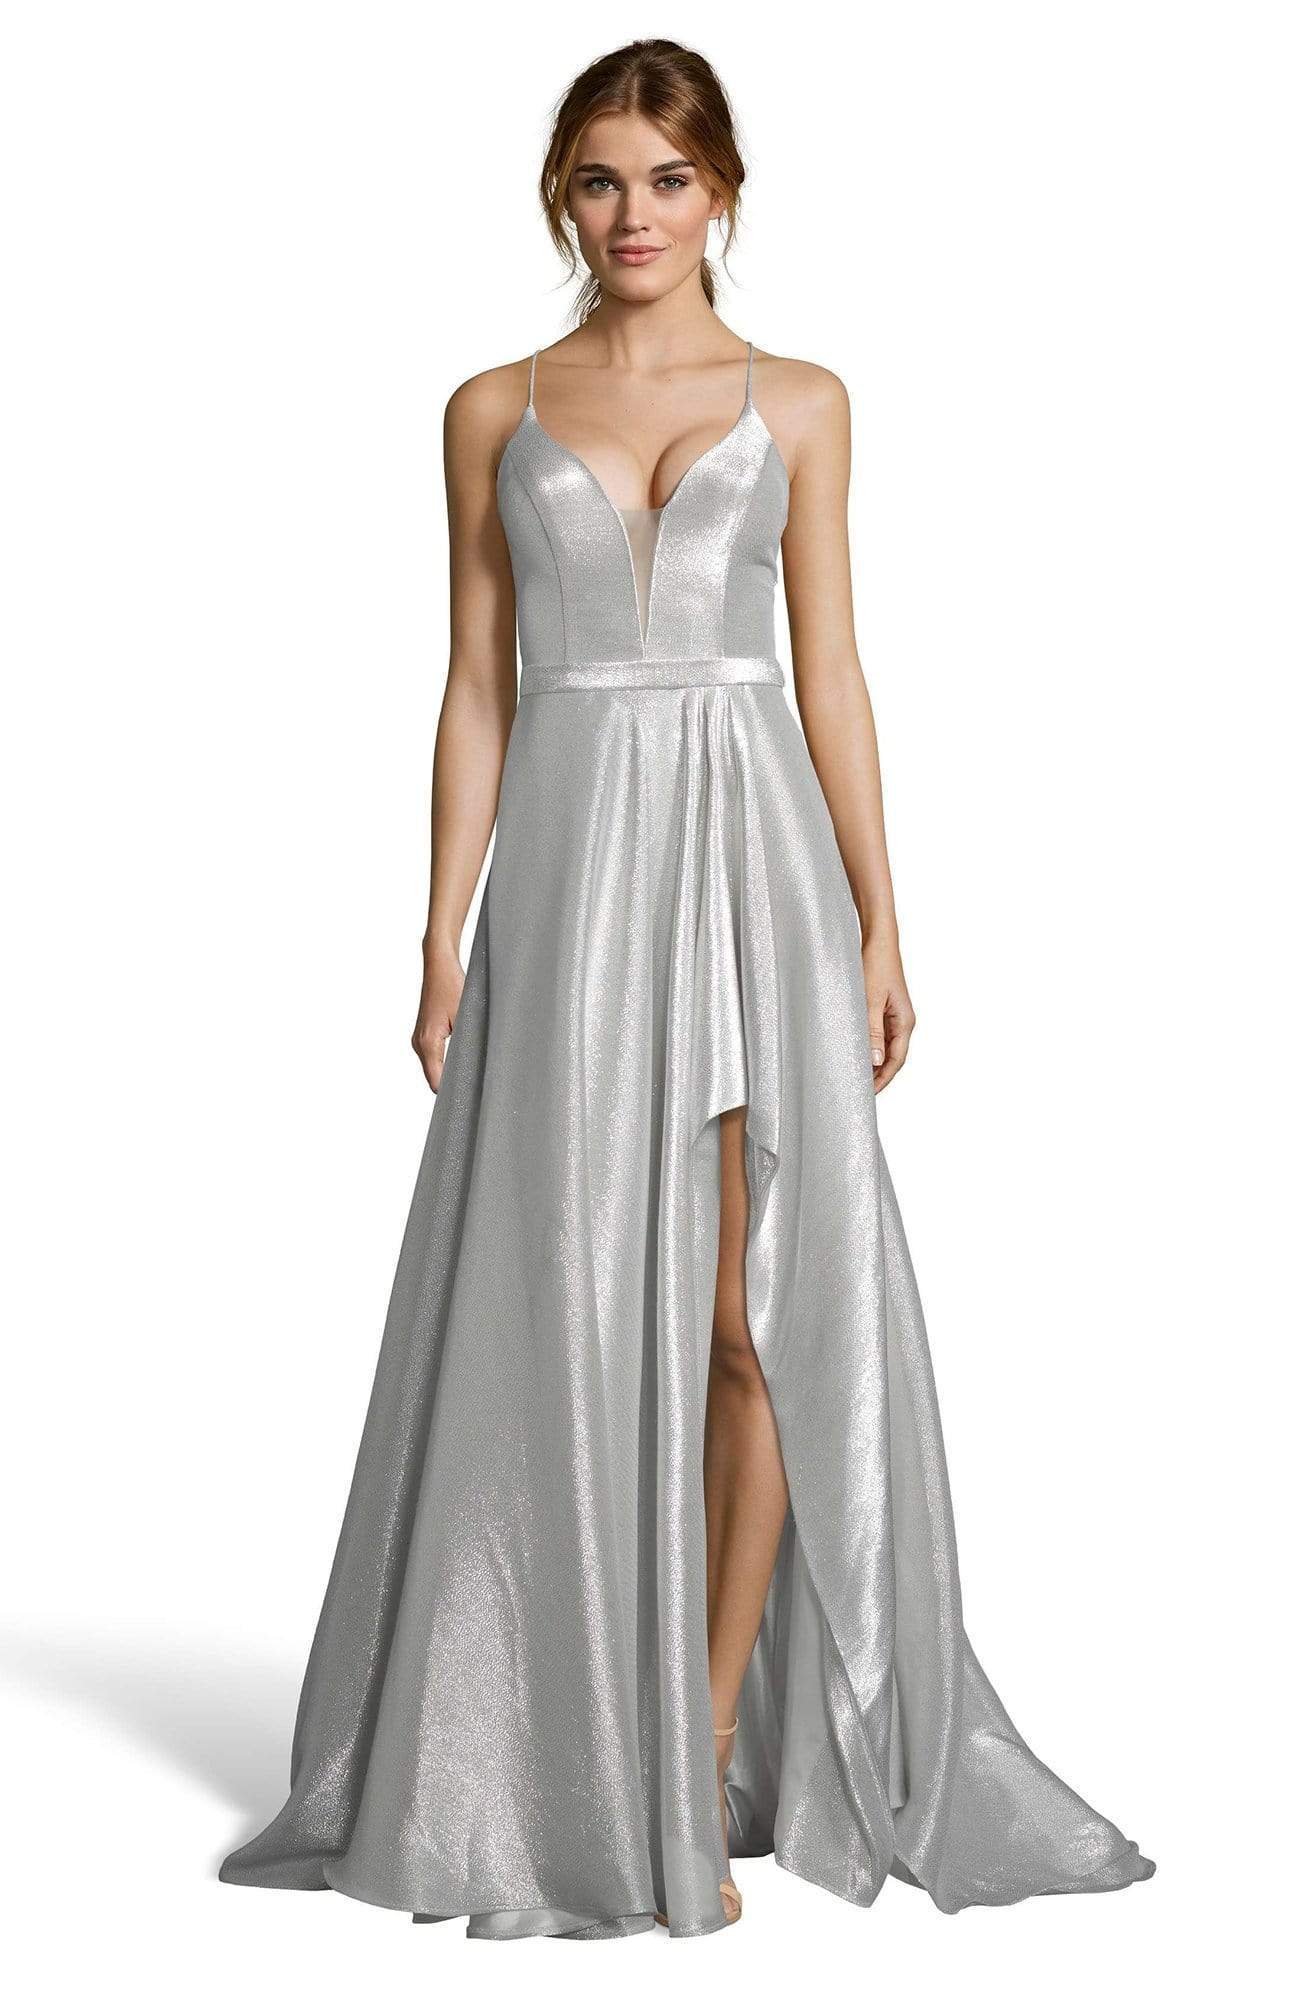 Alyce Paris - Plunging Metallic Lame Gown 60712SC In Silver